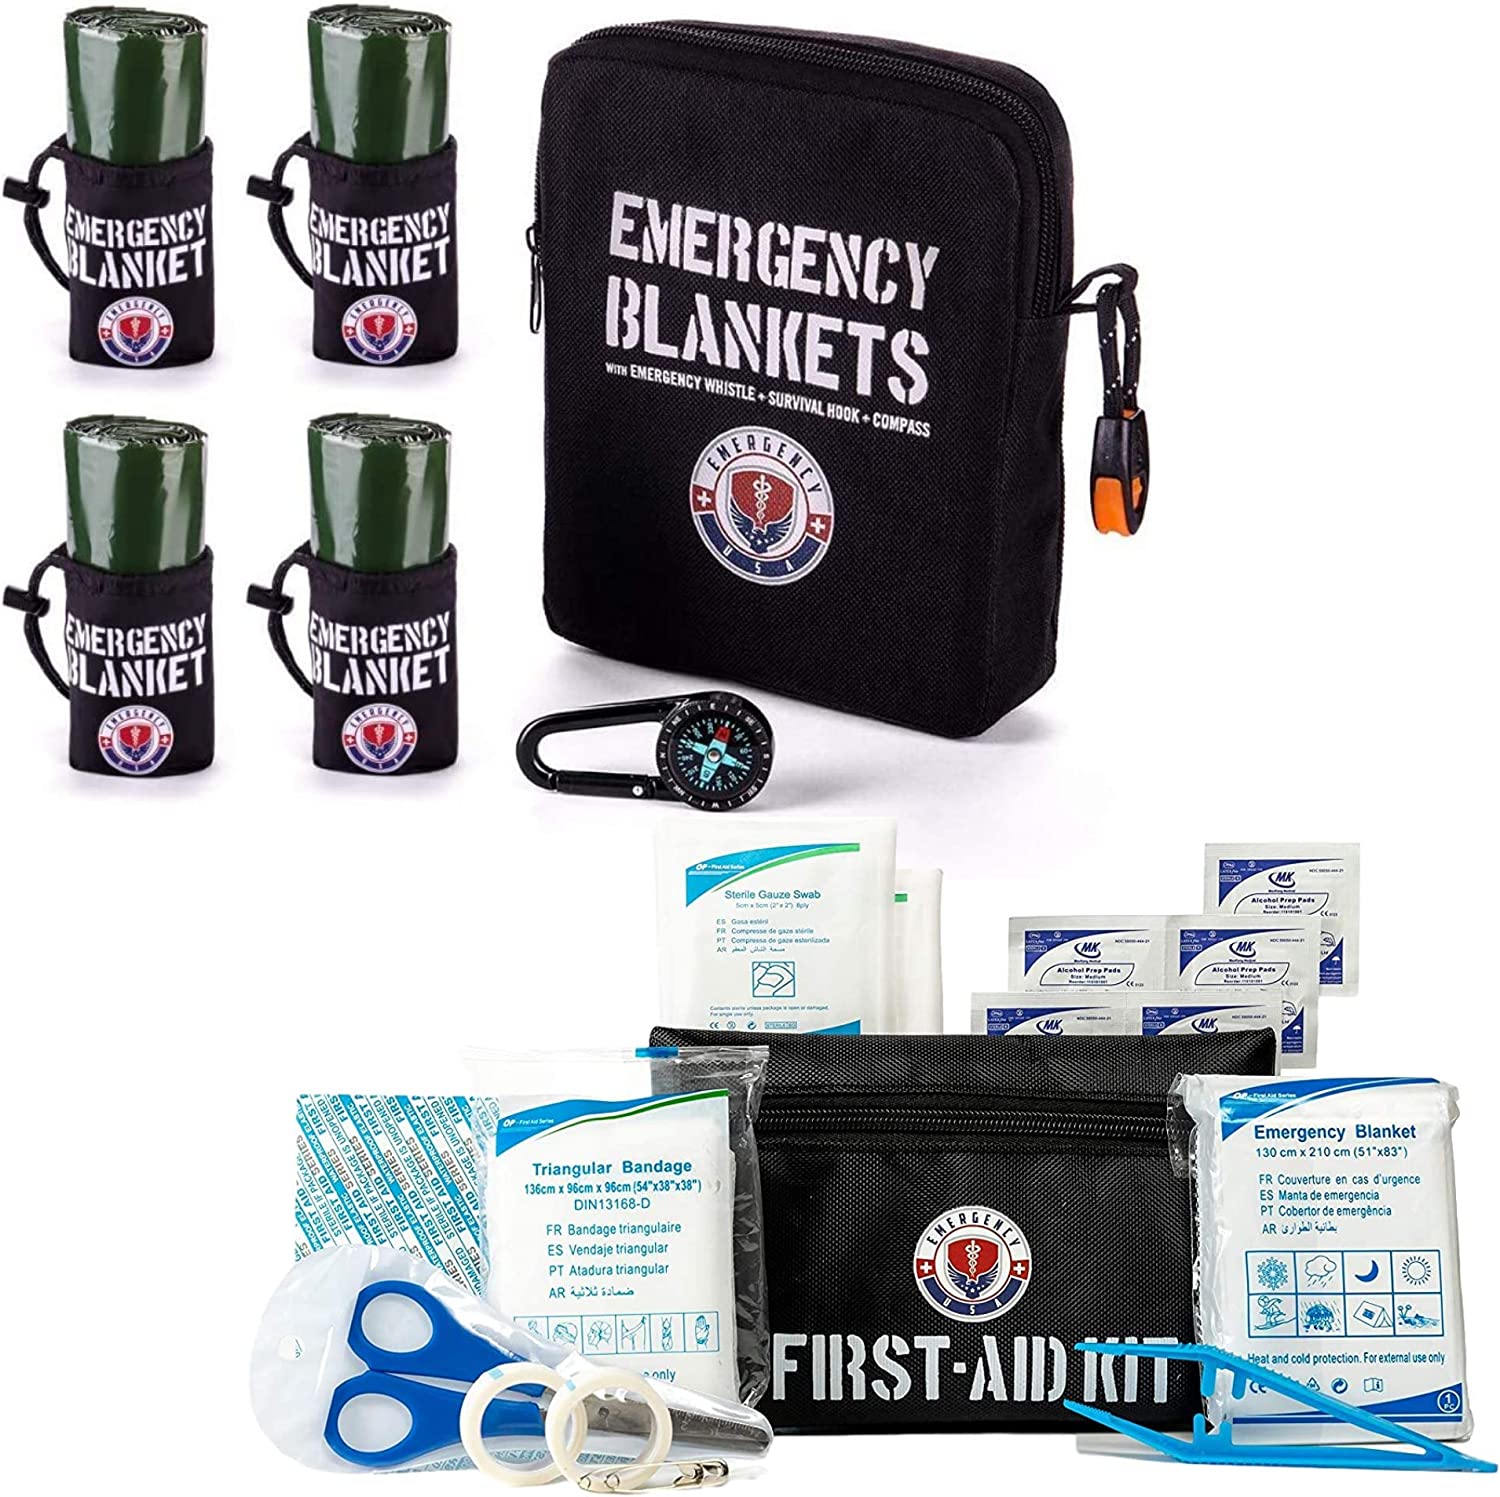 Pack of 4 Emergency Blankets – First Aid Blankets – Mylar Thermal Reflective Blankets – Military Survival Blanket + First Aid Kit Medical Emergency Bag Travel Survival Kit…